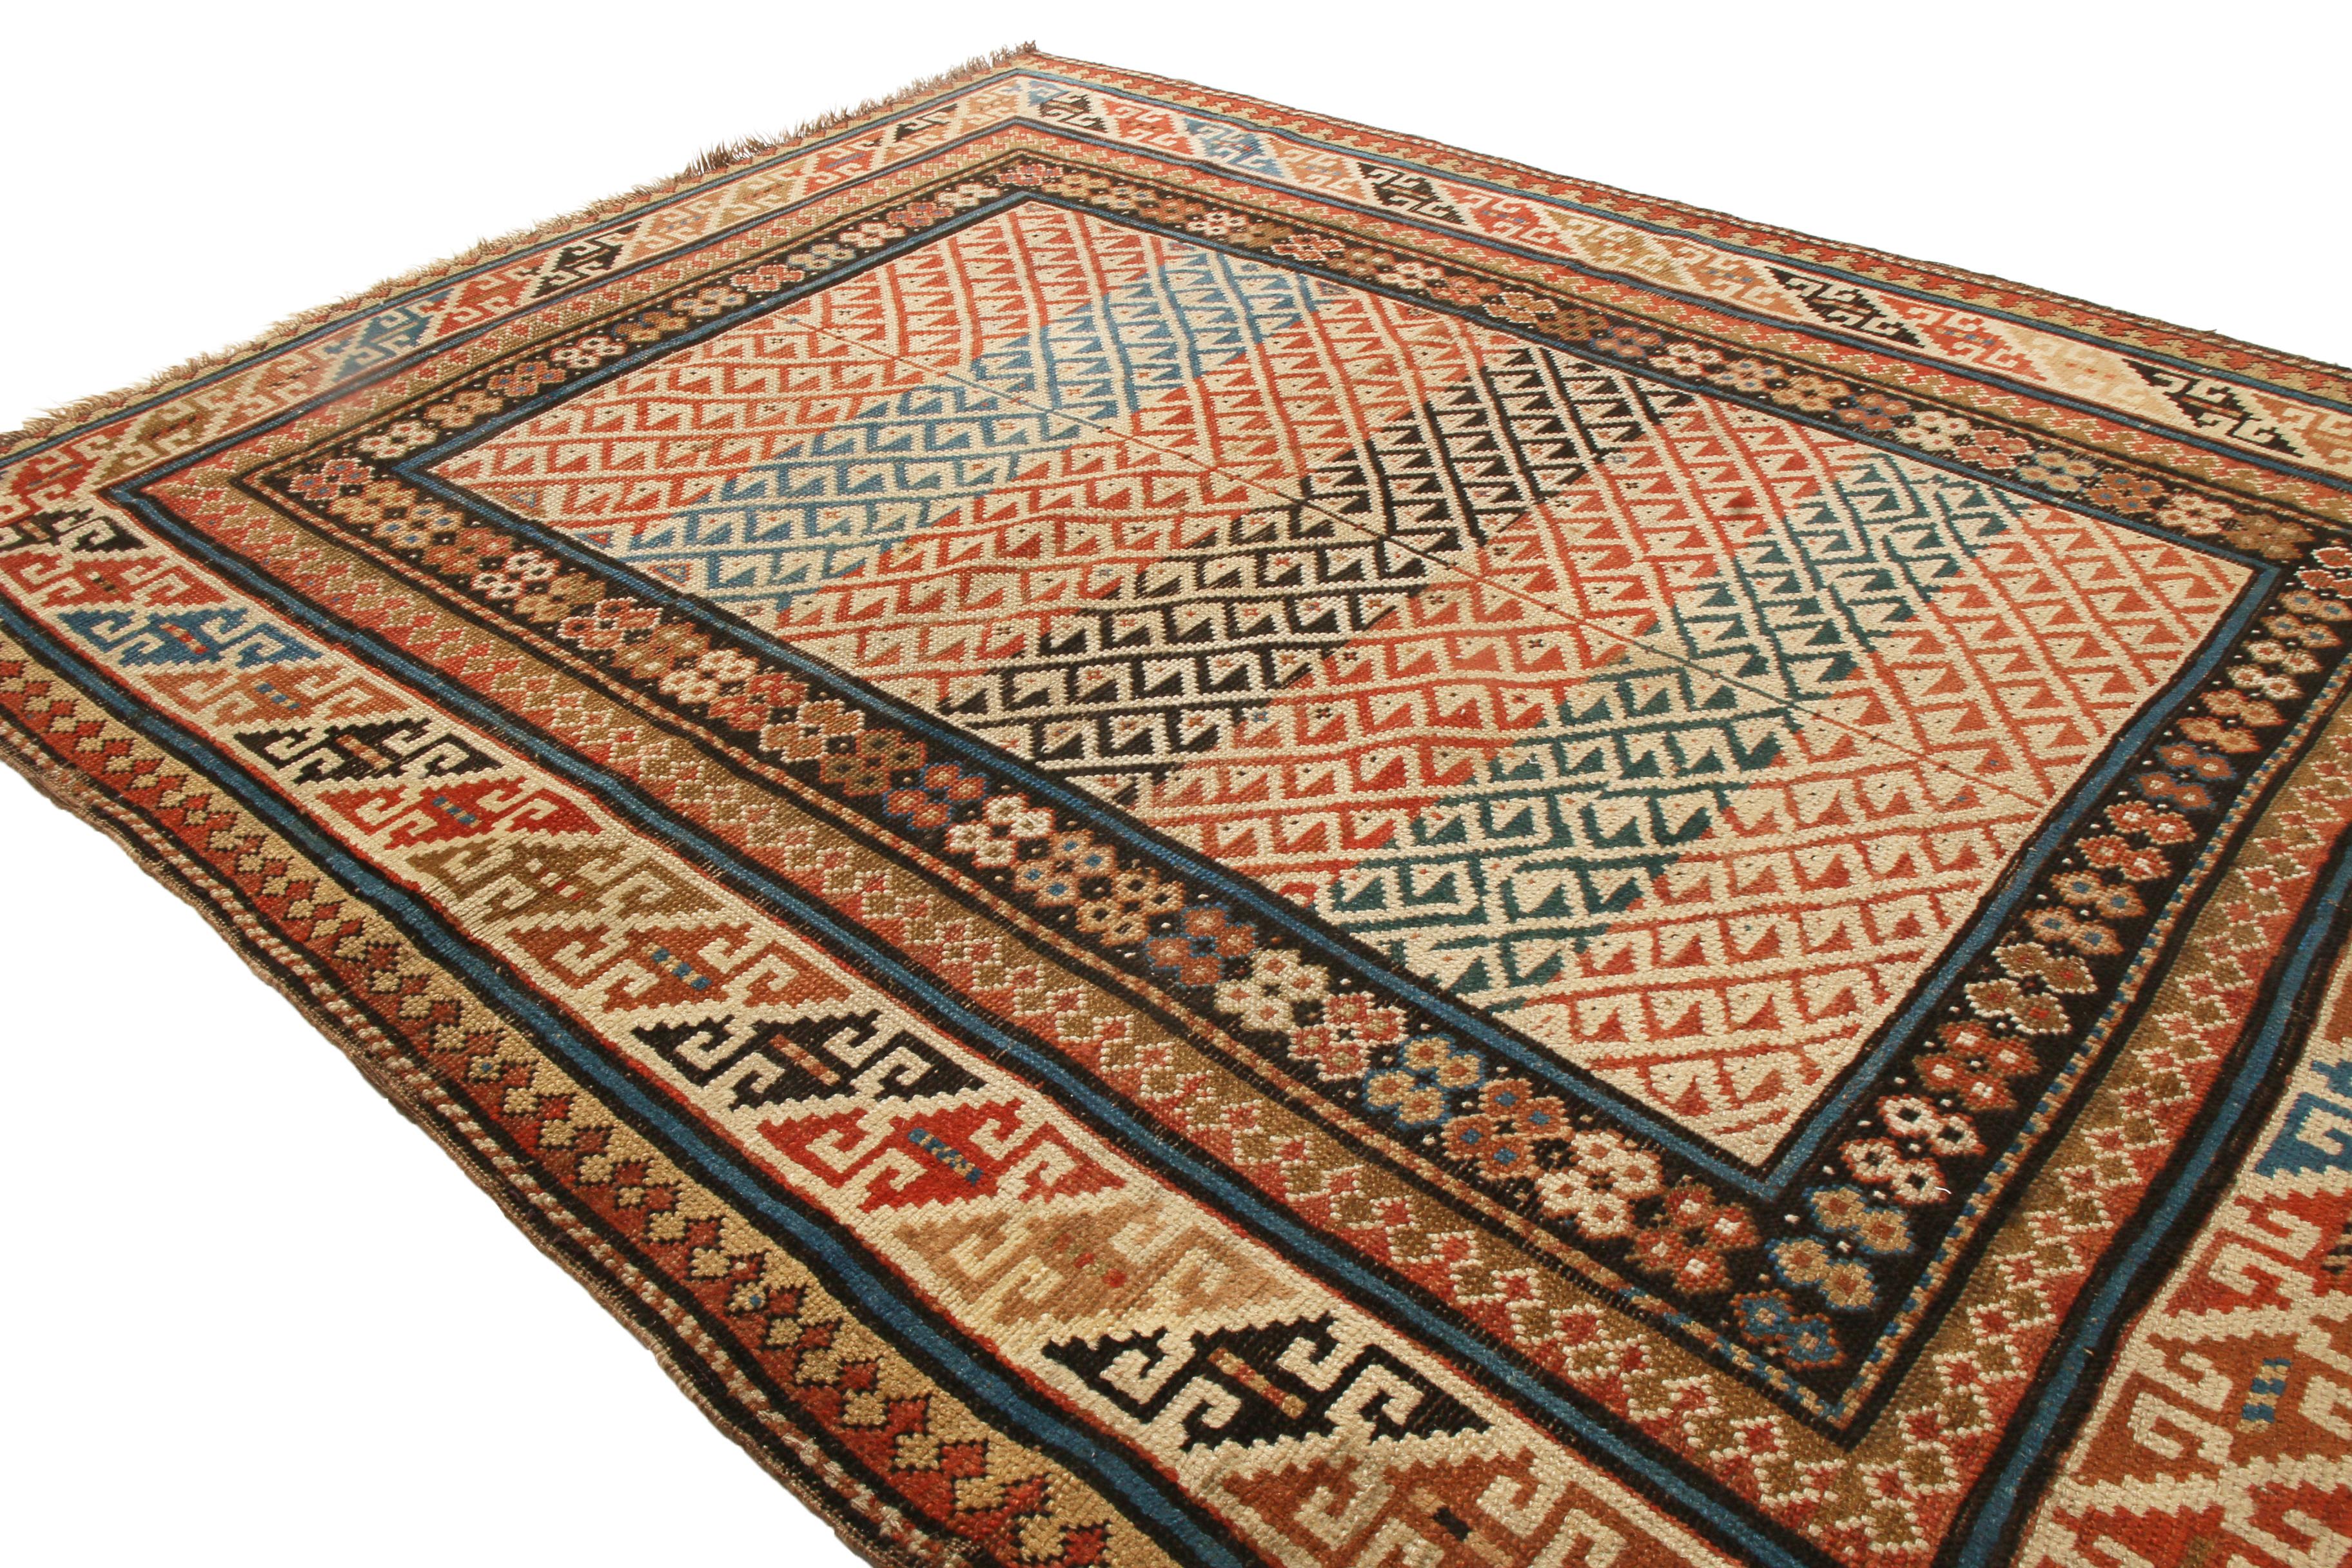 European Antique Kuba Traditional Red and Beige Wool Rug